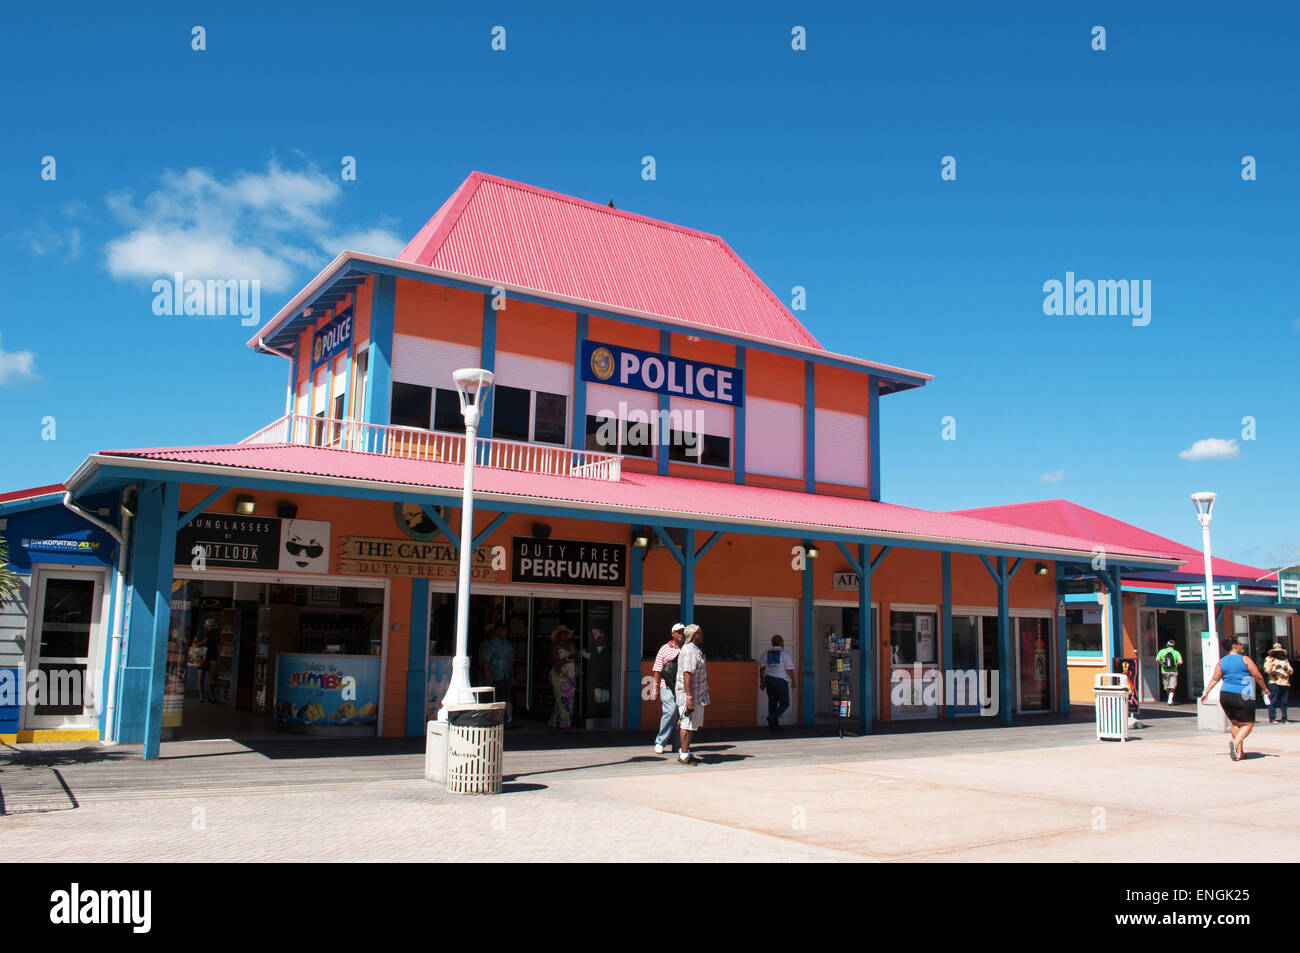 St Martin, Saint Martin, Sint Maarten, Netherlands Antilles, Caribbean: the pink building of the Police Department on the seafront of Philipsburg Stock Photo